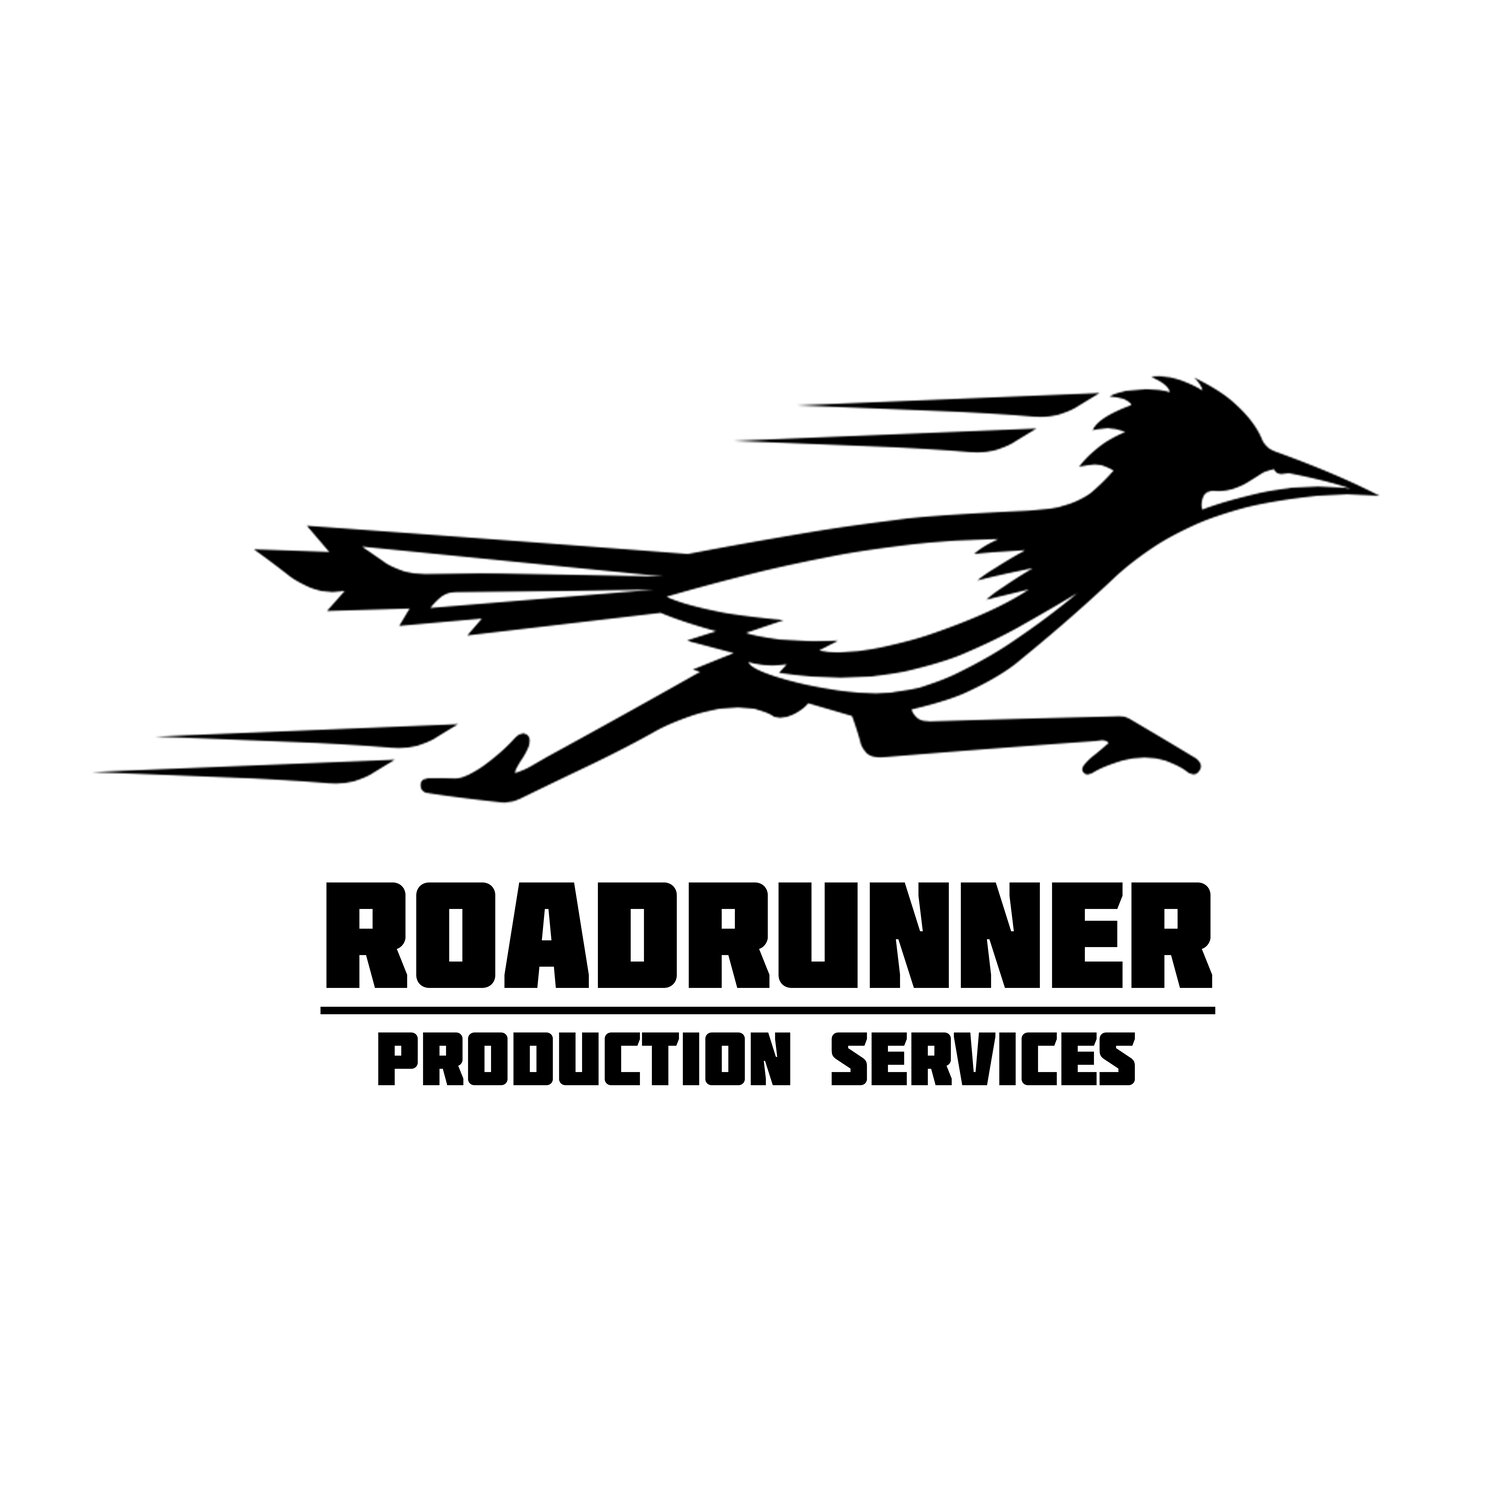 ROADRUNNER PRODUCTION SERVICES